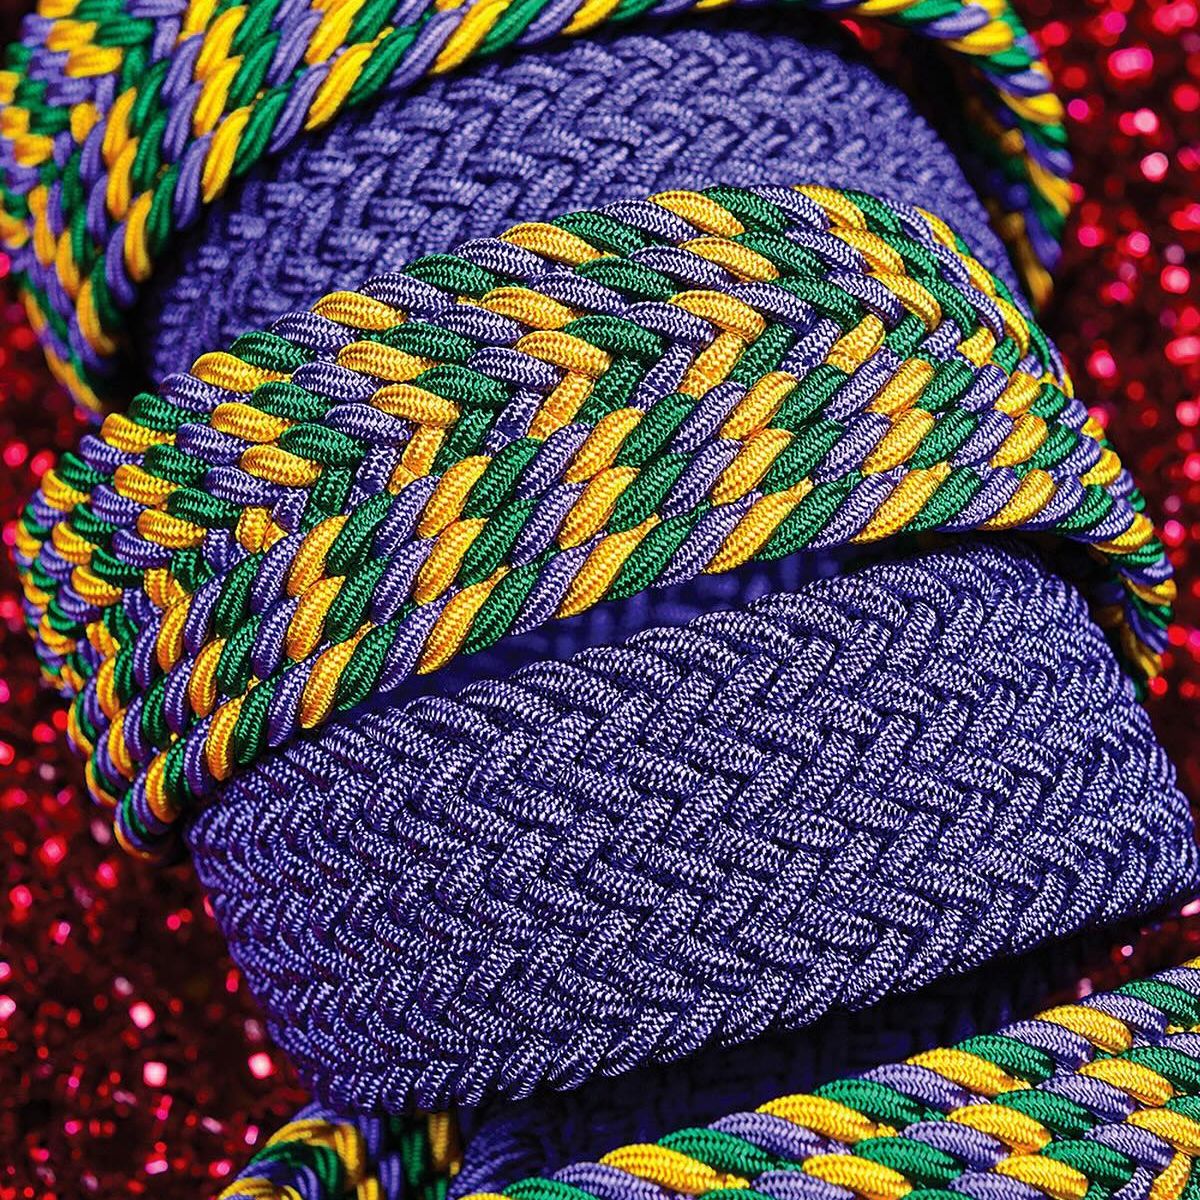 Italian Braided Stretch Rayon Casual Belt in Purple, Gold, and Green by Torino Leather